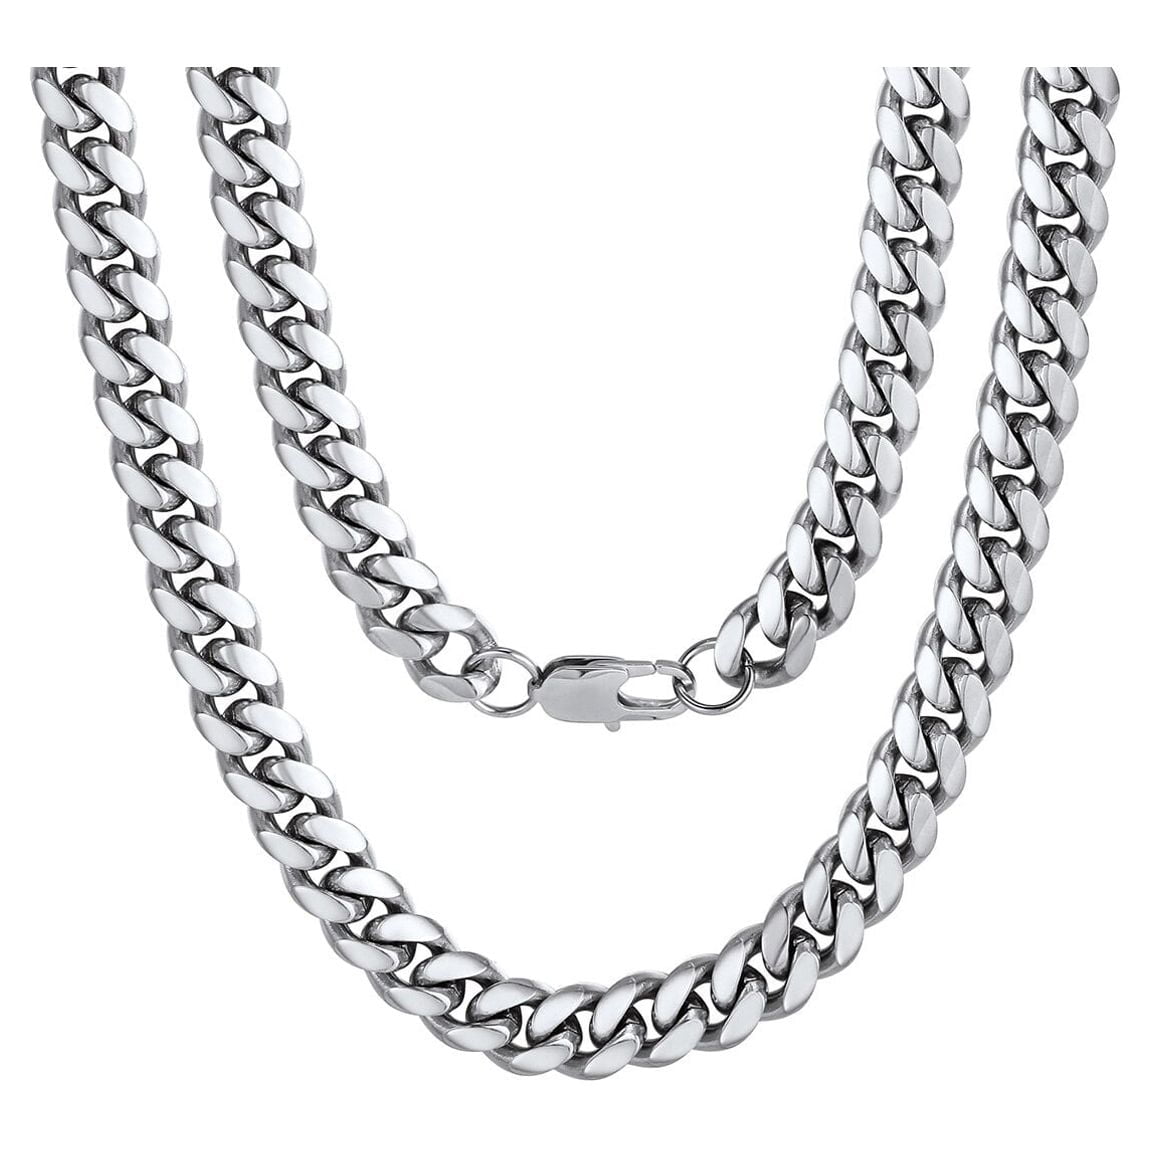 Chainspromax Men's Stainless Steel Cuban Link Chain Necklace 10mm 18inch Hip Hop Jewelry, Size: One size, Silver